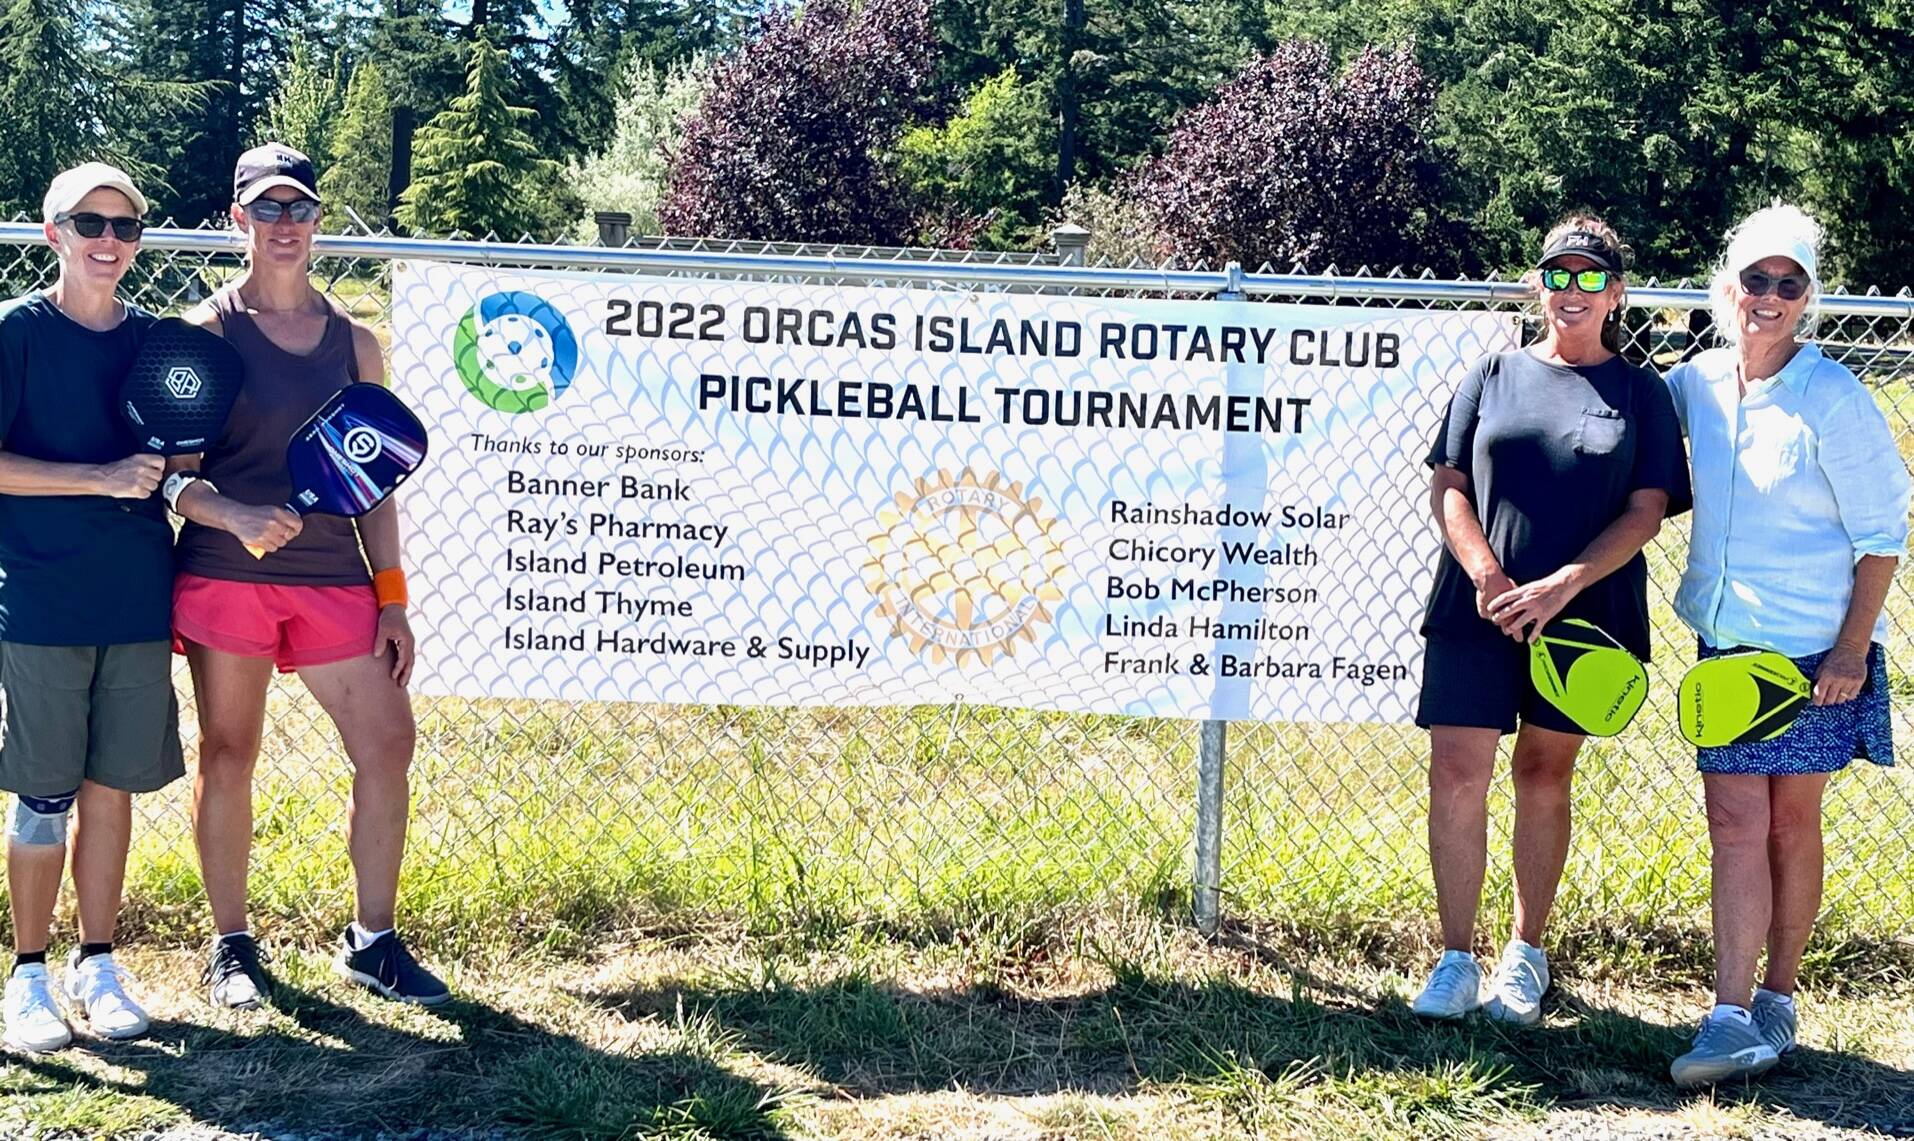 Contributed photo
Maggie Kulyk and Christine Lee of Orcas Island, gold winners of the women’s doubles division, with silver winner Kathy Cox and Po Powell of San Juan Island.